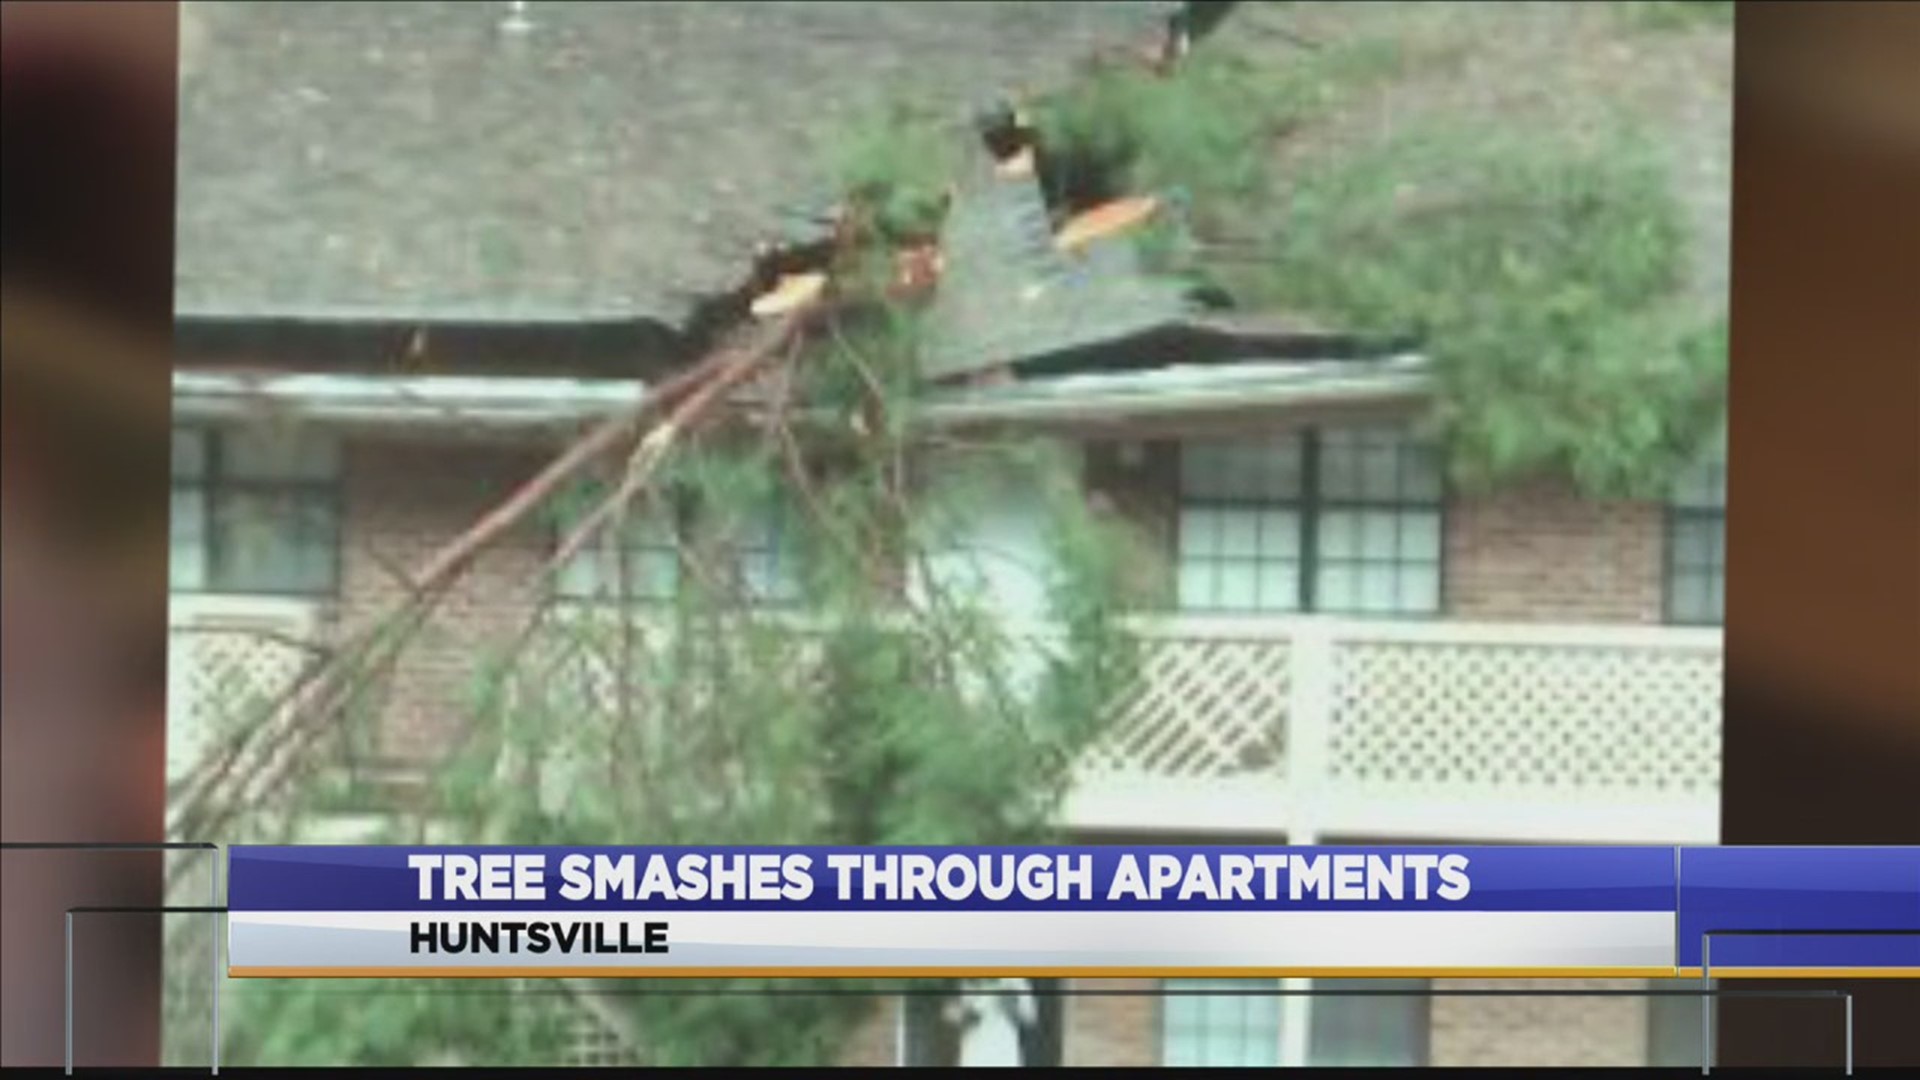 At least a dozen people are forced out of their homes after a large tree crashed through their apartment building Tuesday.